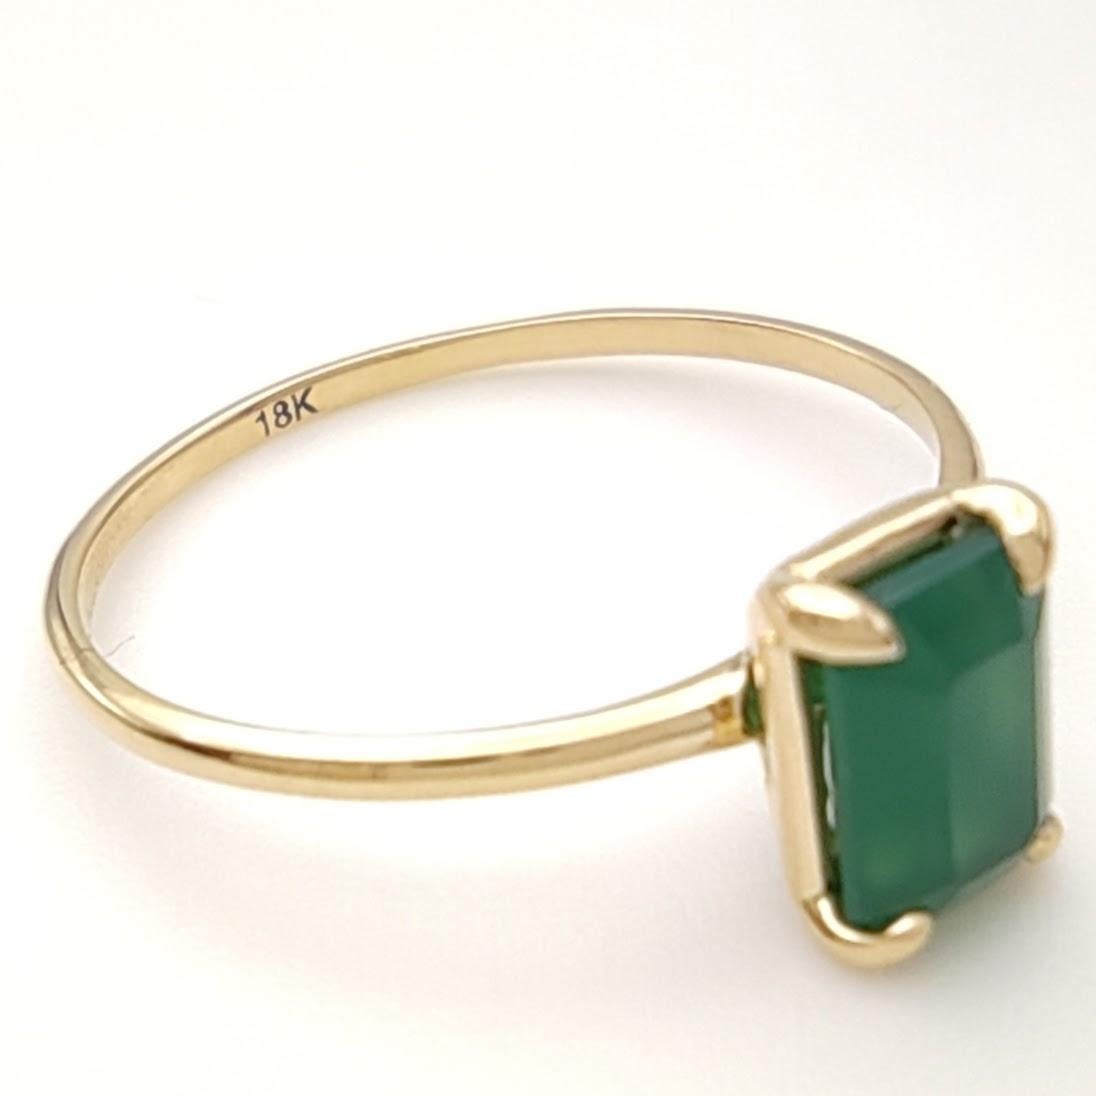 0.56ct Emerald in 18K Gold Minimalist Everyday Ring for Elegance and Versatility For Sale 3